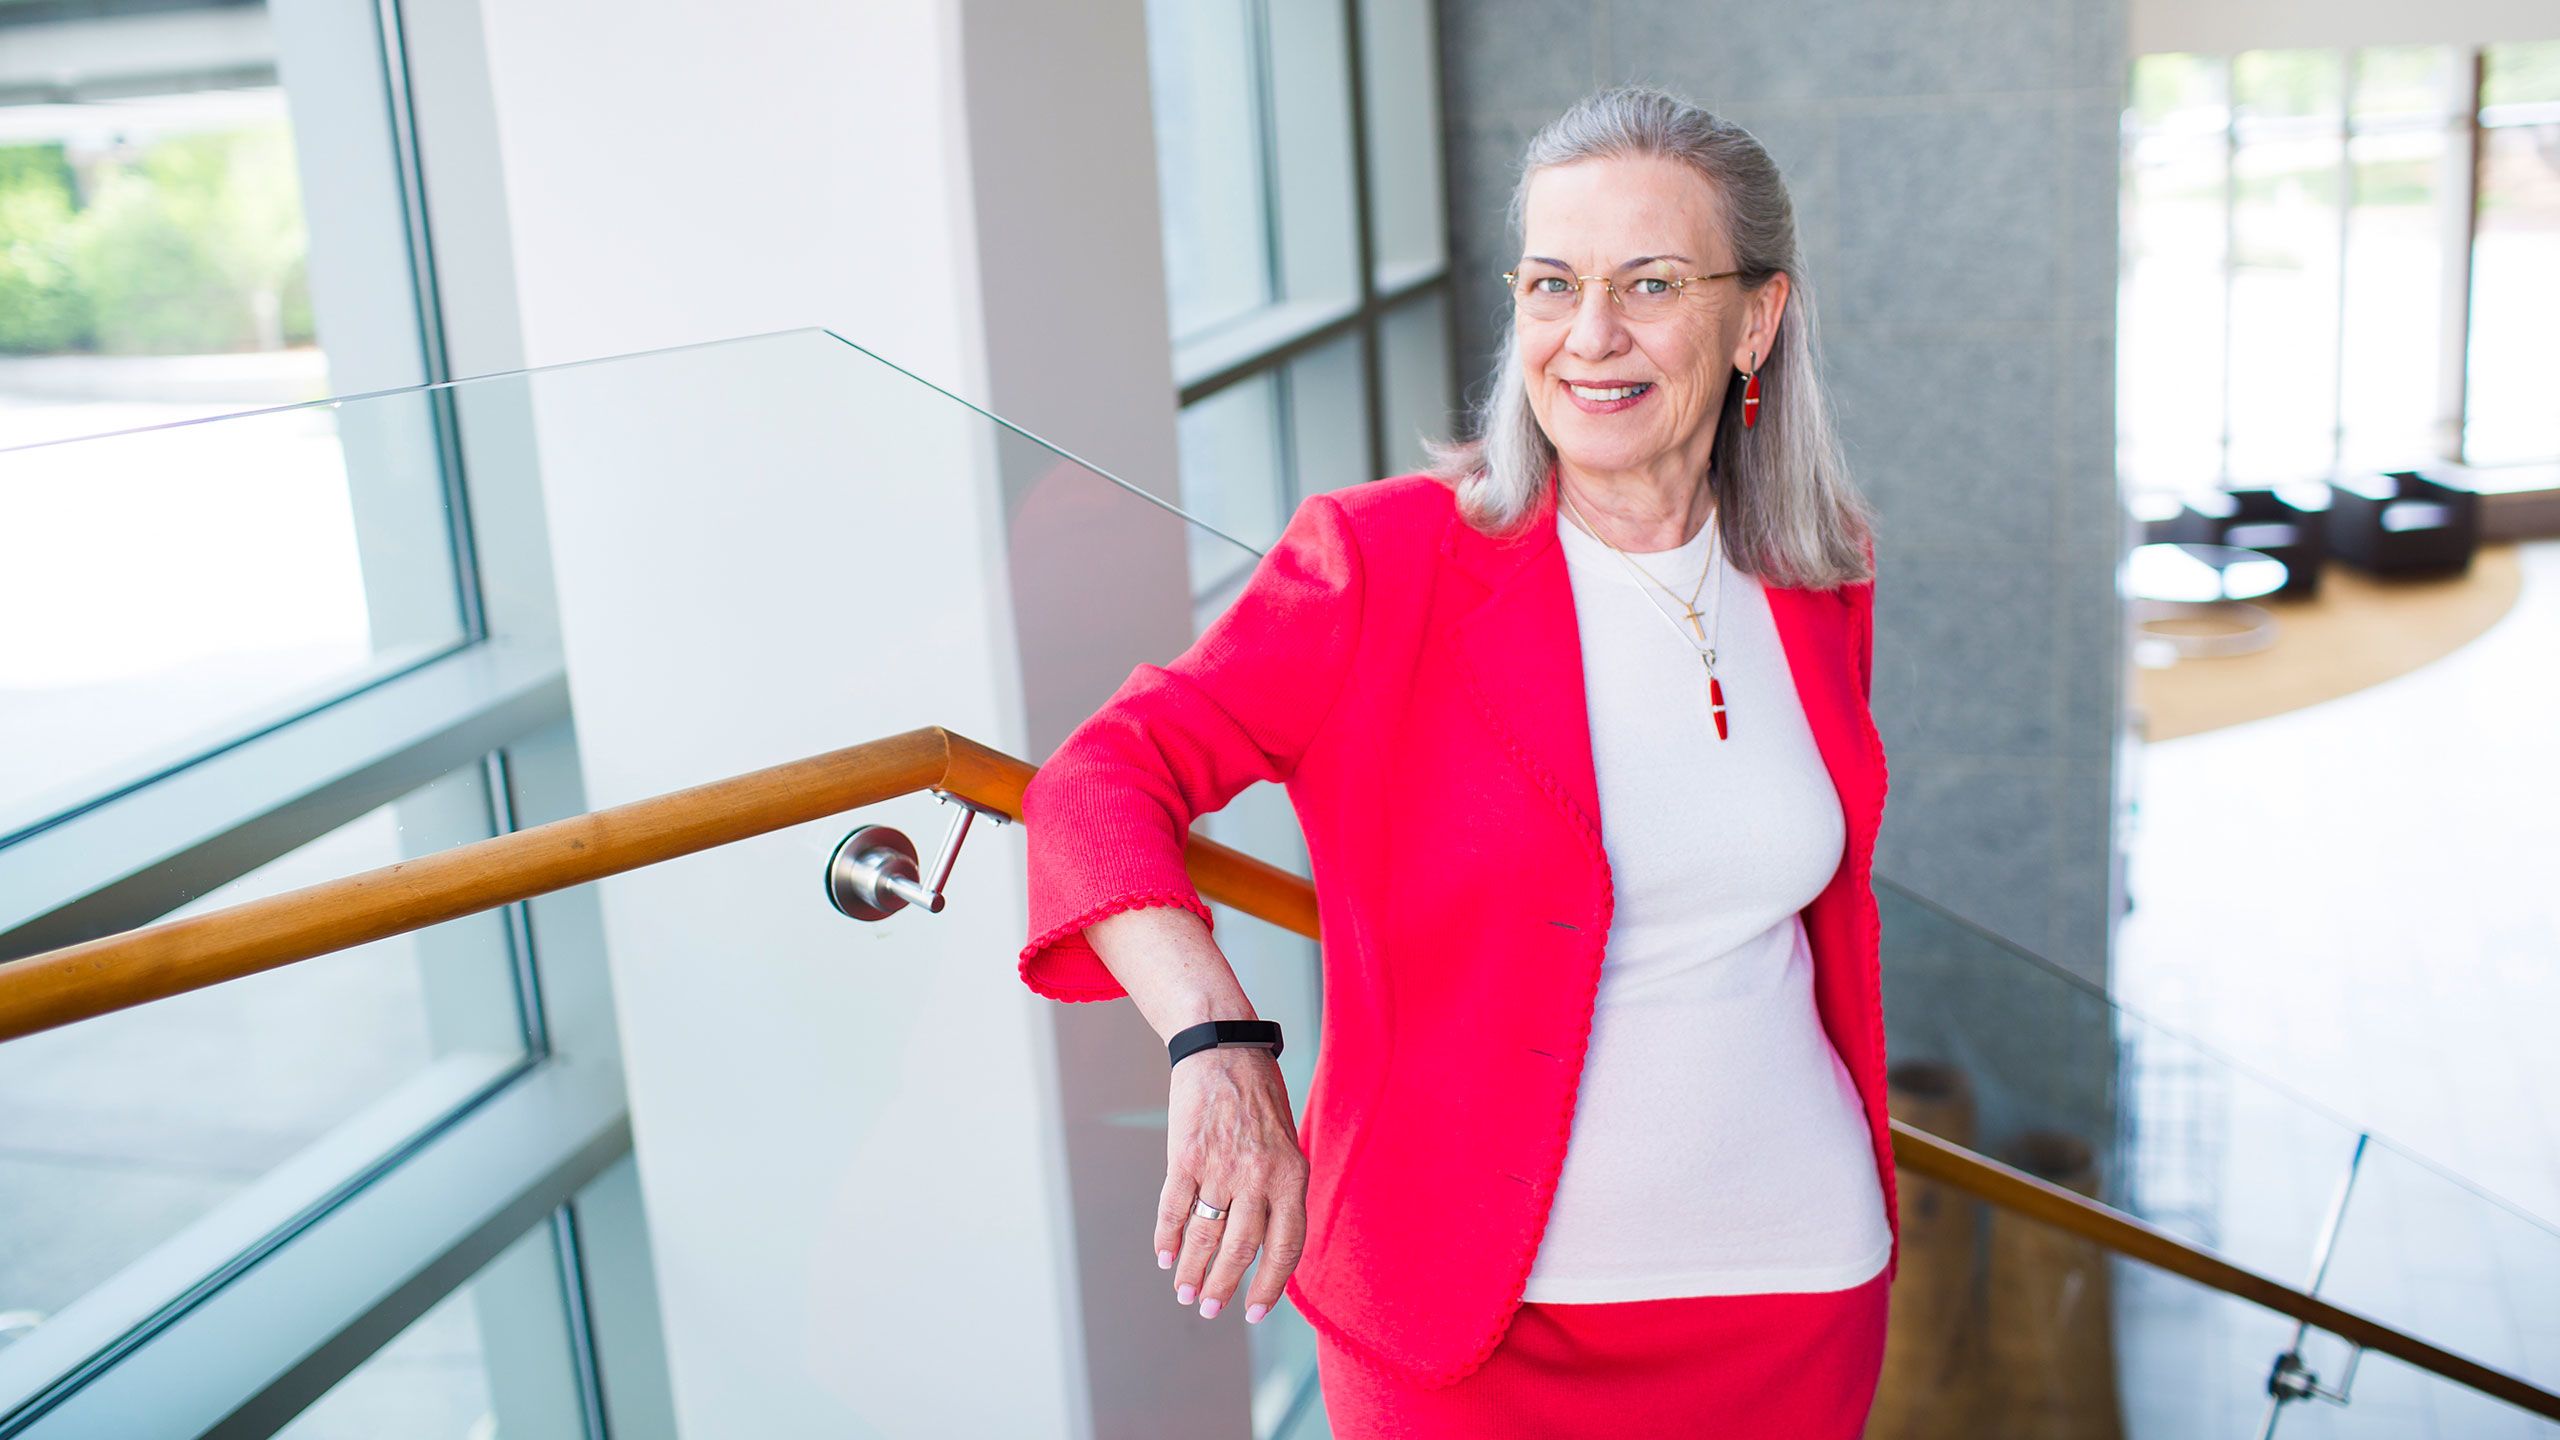 Professor Carol Hogue stands on a staircase in front of windows.